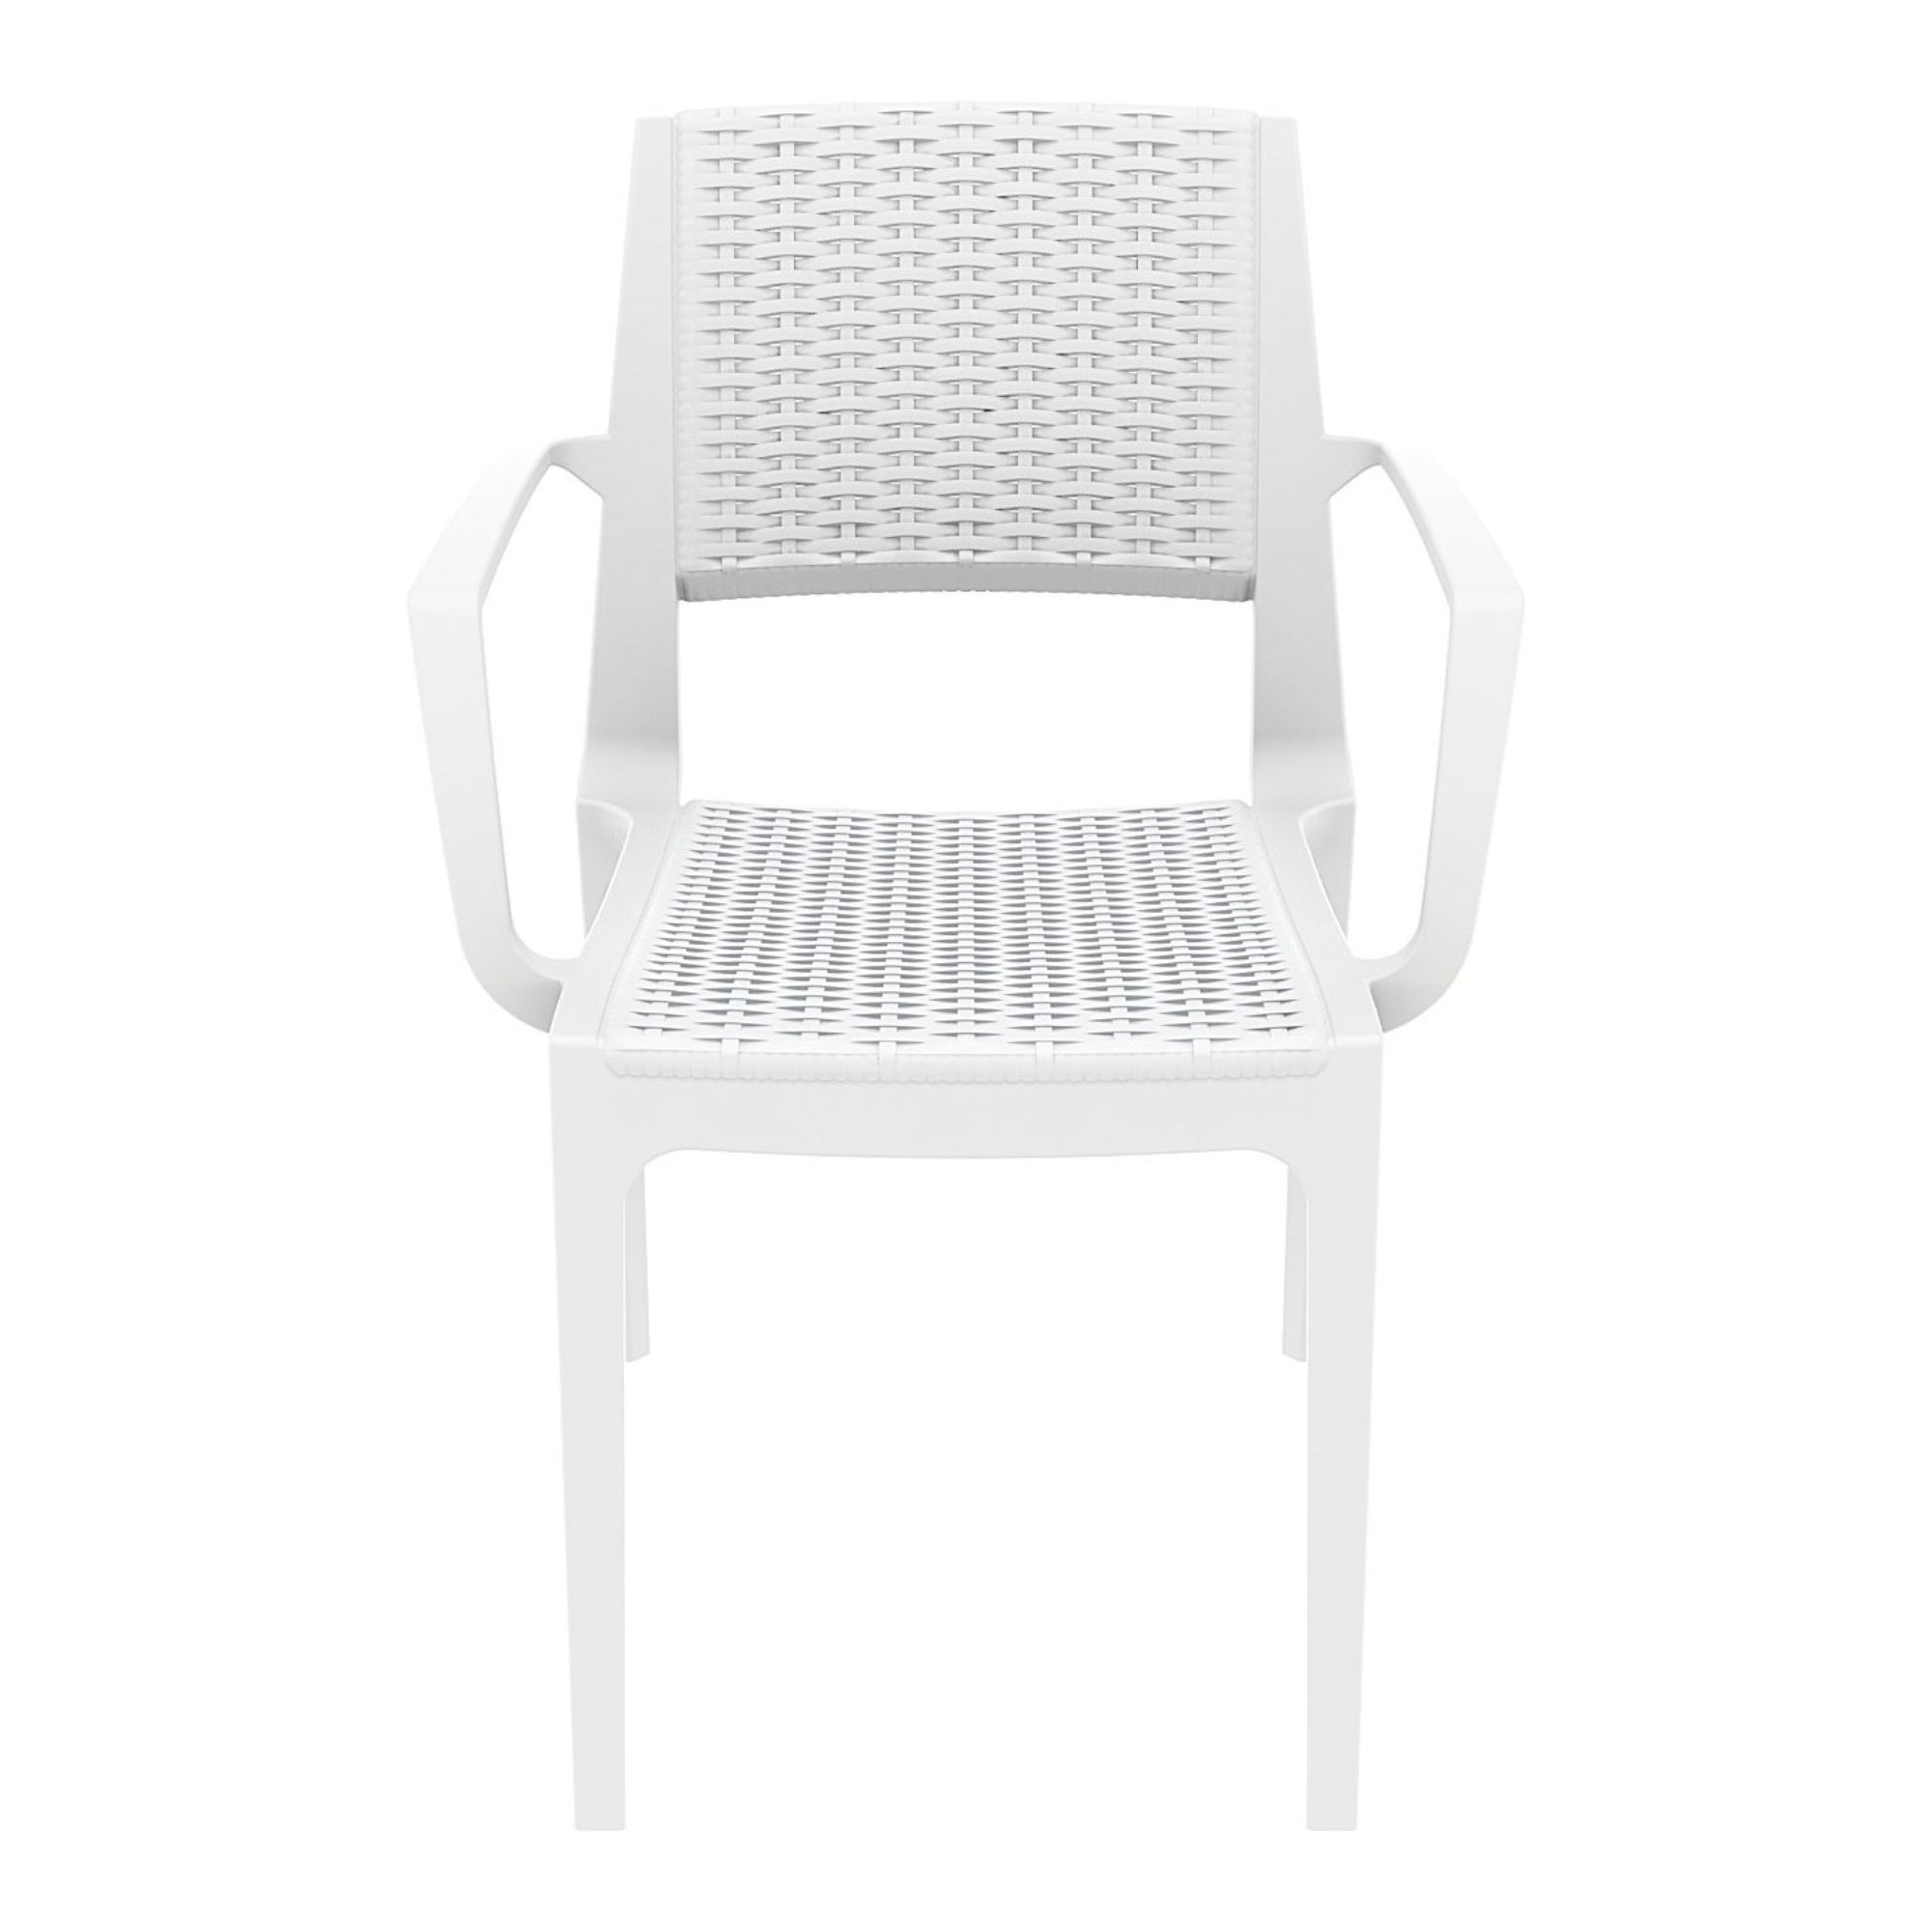 Luxury Commercial Living 32" White Outdoor Patio Wickerlook Dining Arm Chair - image 3 of 9